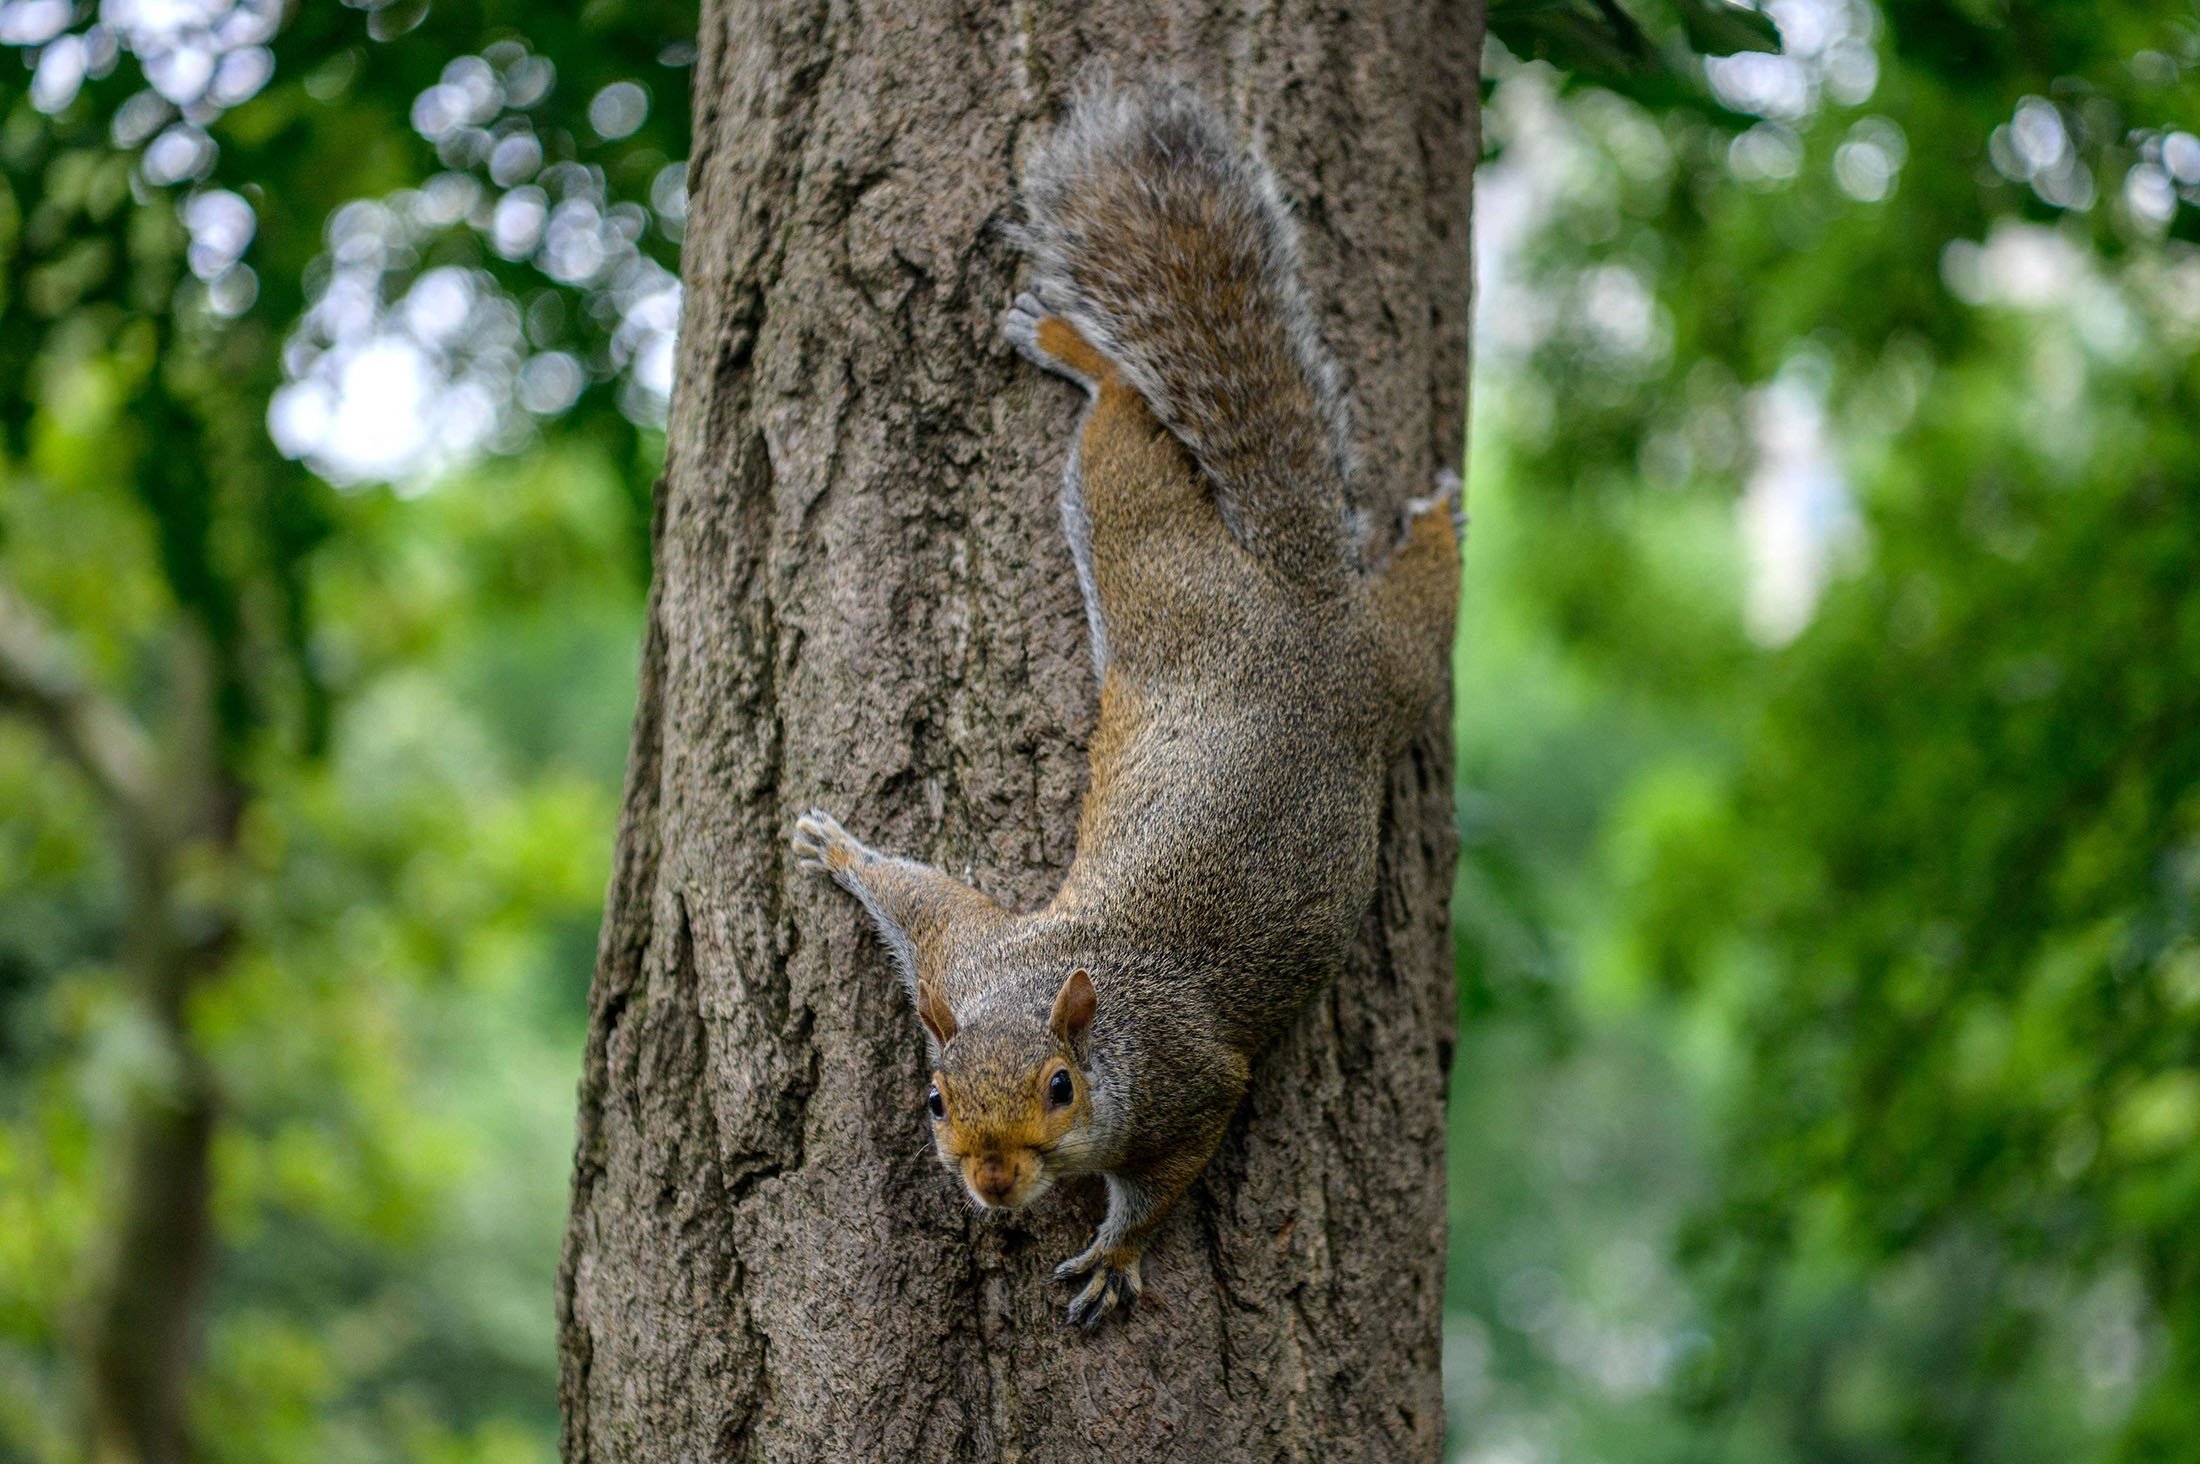 A squirrel climbs a tree in Central Park in New York City, U.S., July 13, 2021. (AFP Photo)